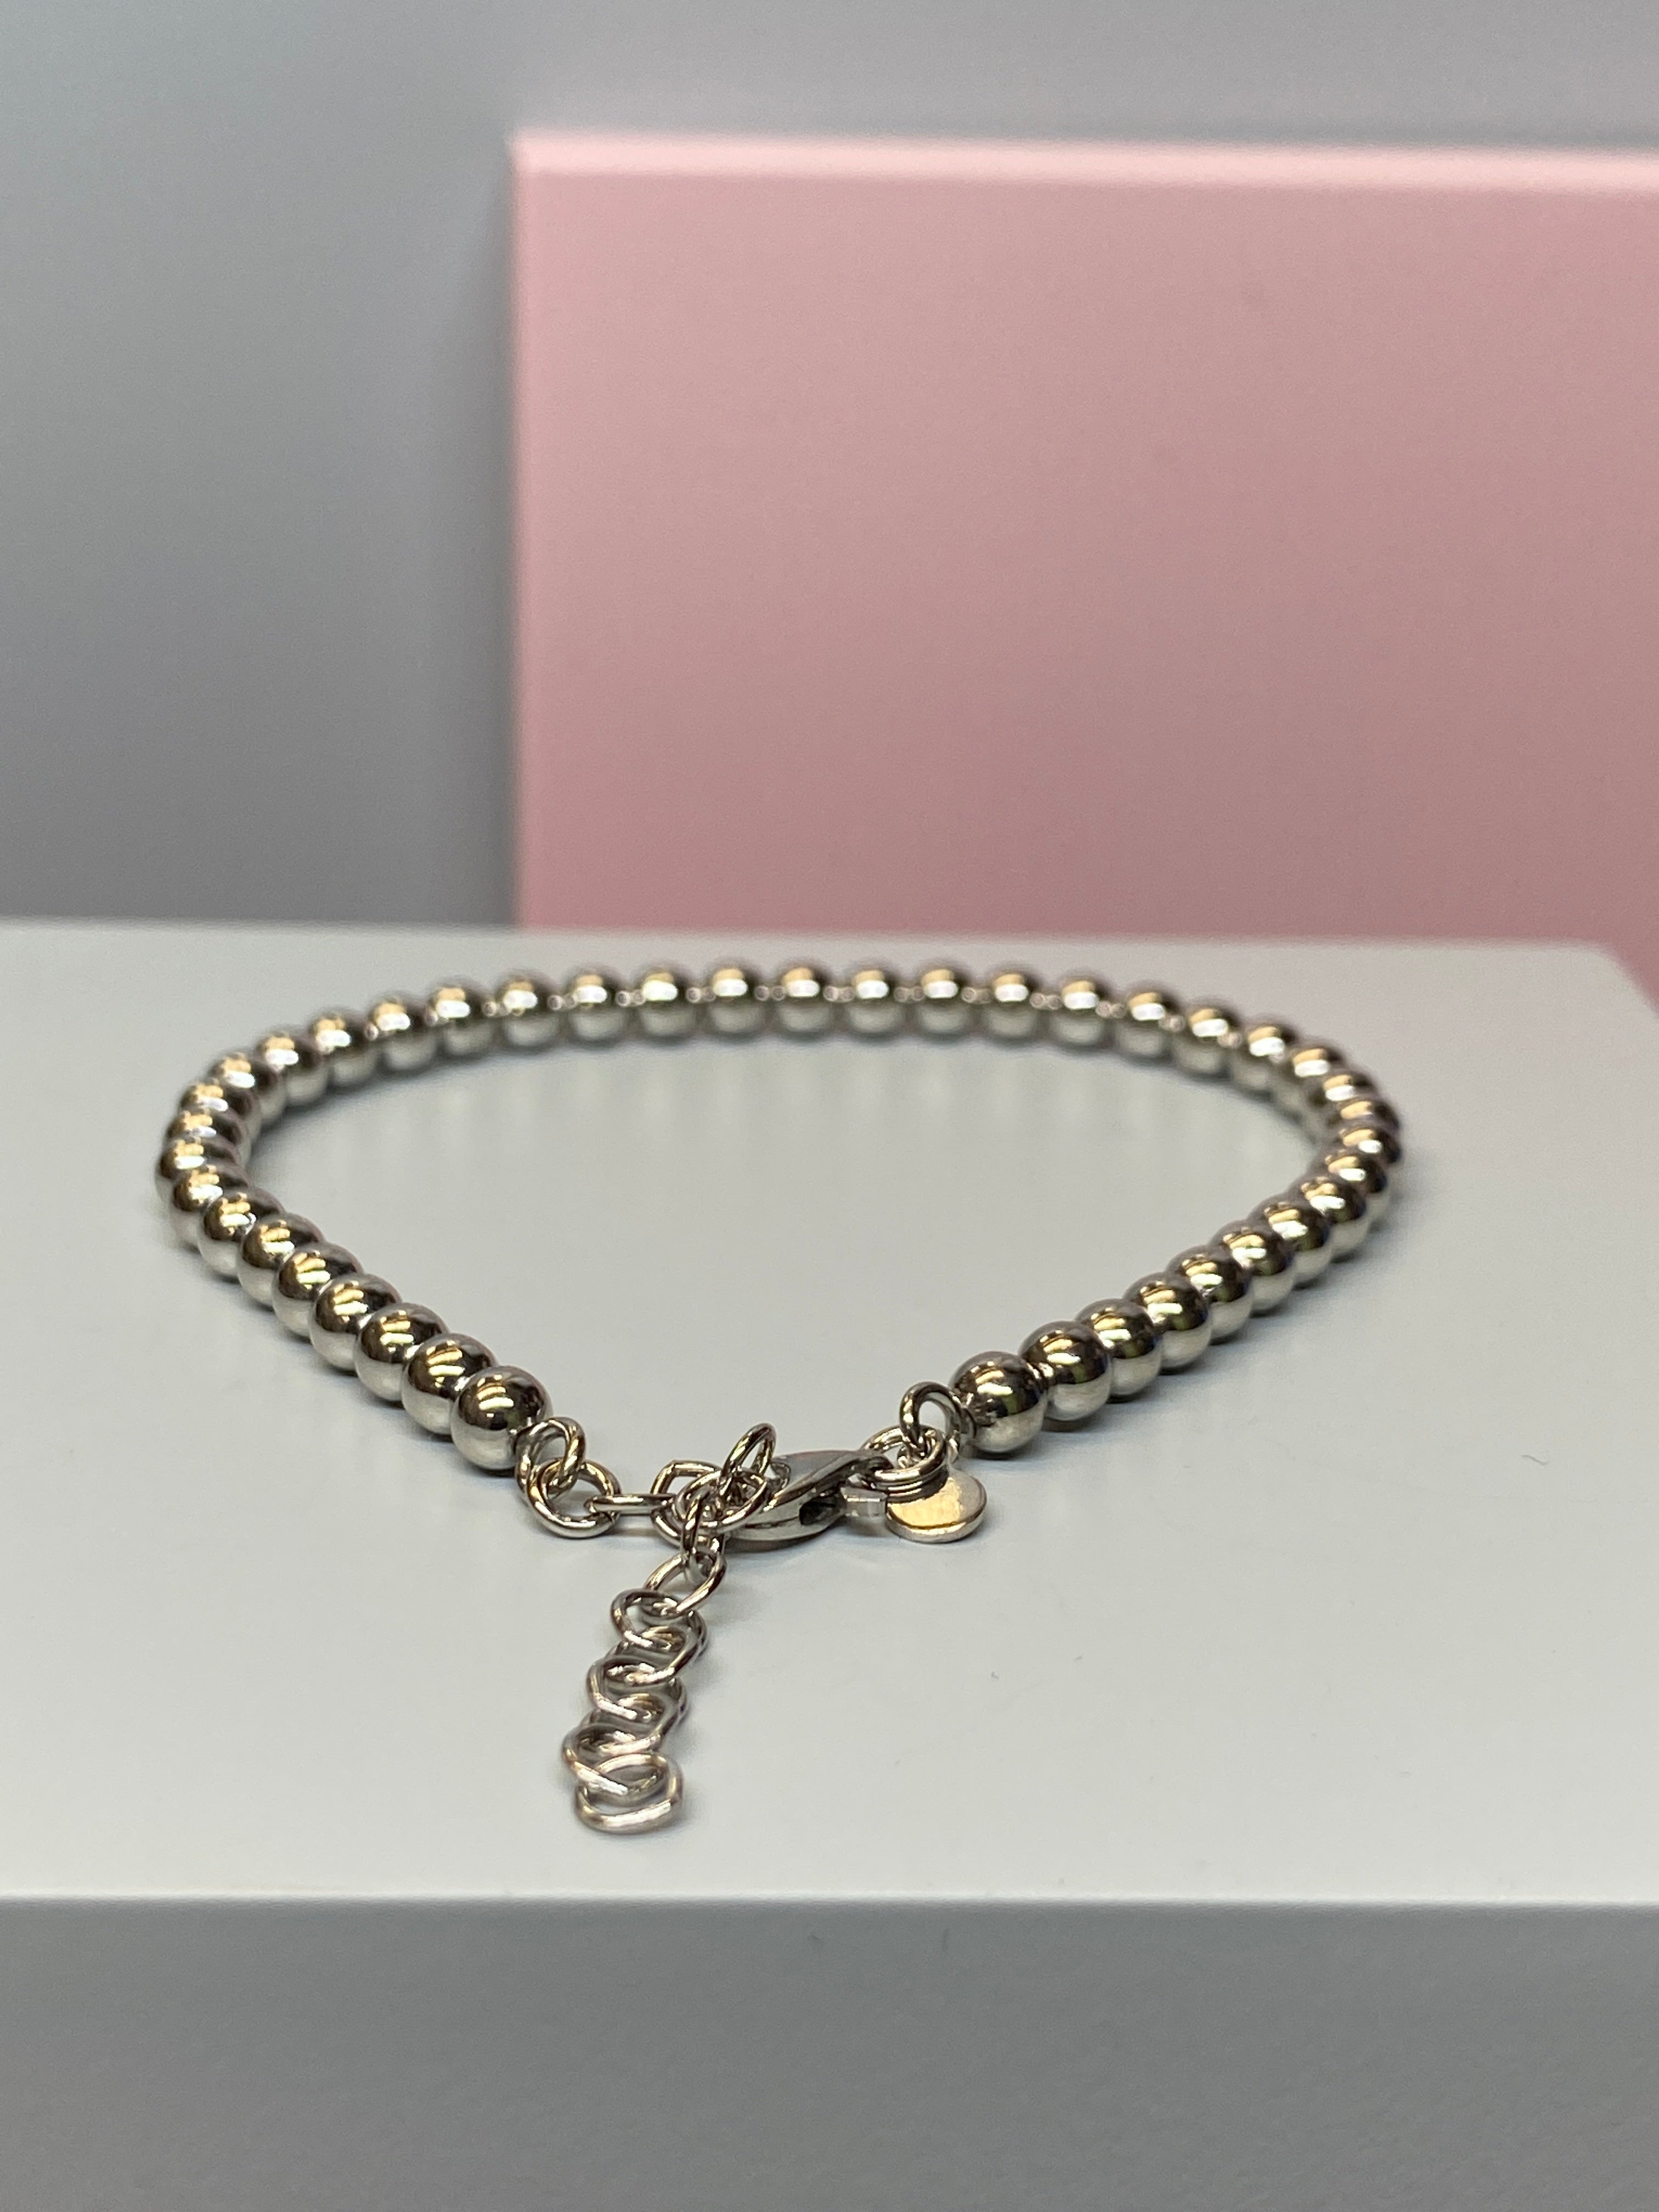 Silver Beaded Bracelet - Hallmark Jewellers Formby & The Jewellers Bench Widnes